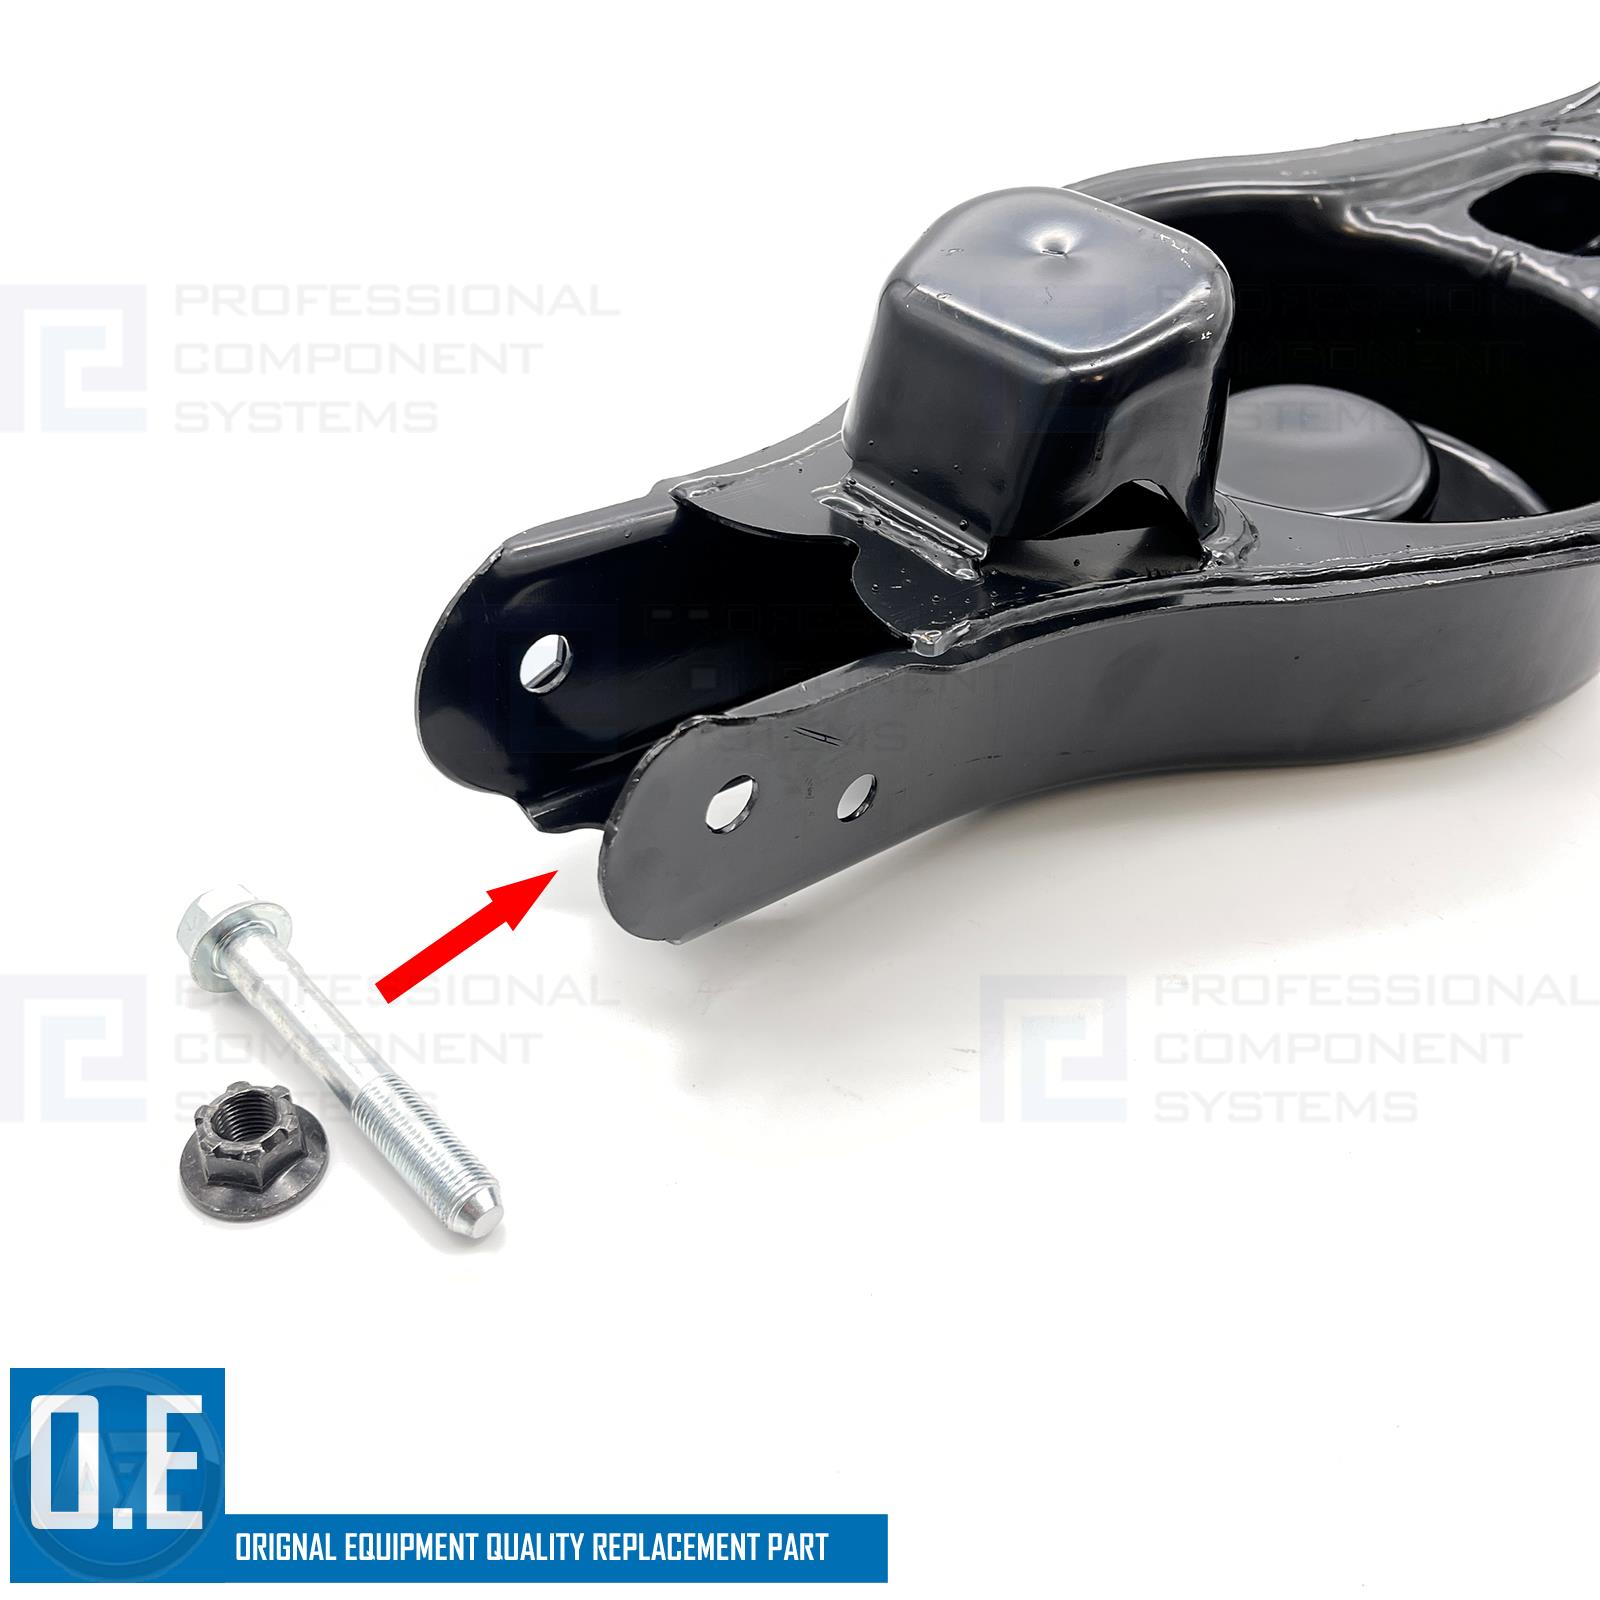 FOR MAZDA 6 07-13 KIT ARMS | LEFT BOLTS GH LOWER REAR NUTS SUSPENSION RIGHT eBay BUSHES